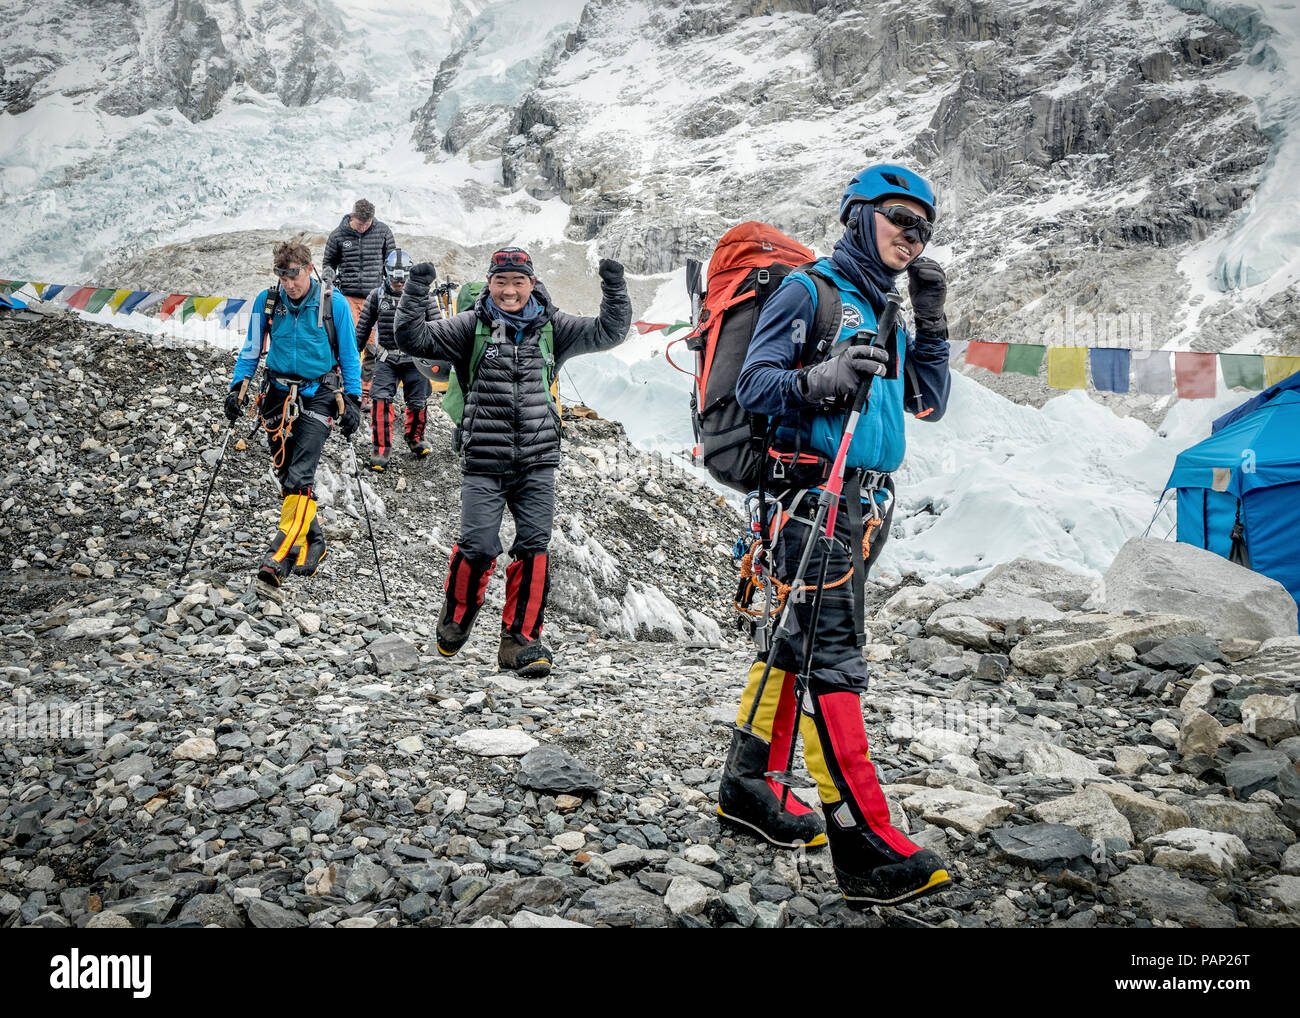 Nepal, Solo Khumbu, Everest, Sagamartha National Park, Mountaineers arriving at the base camp Stock Photo